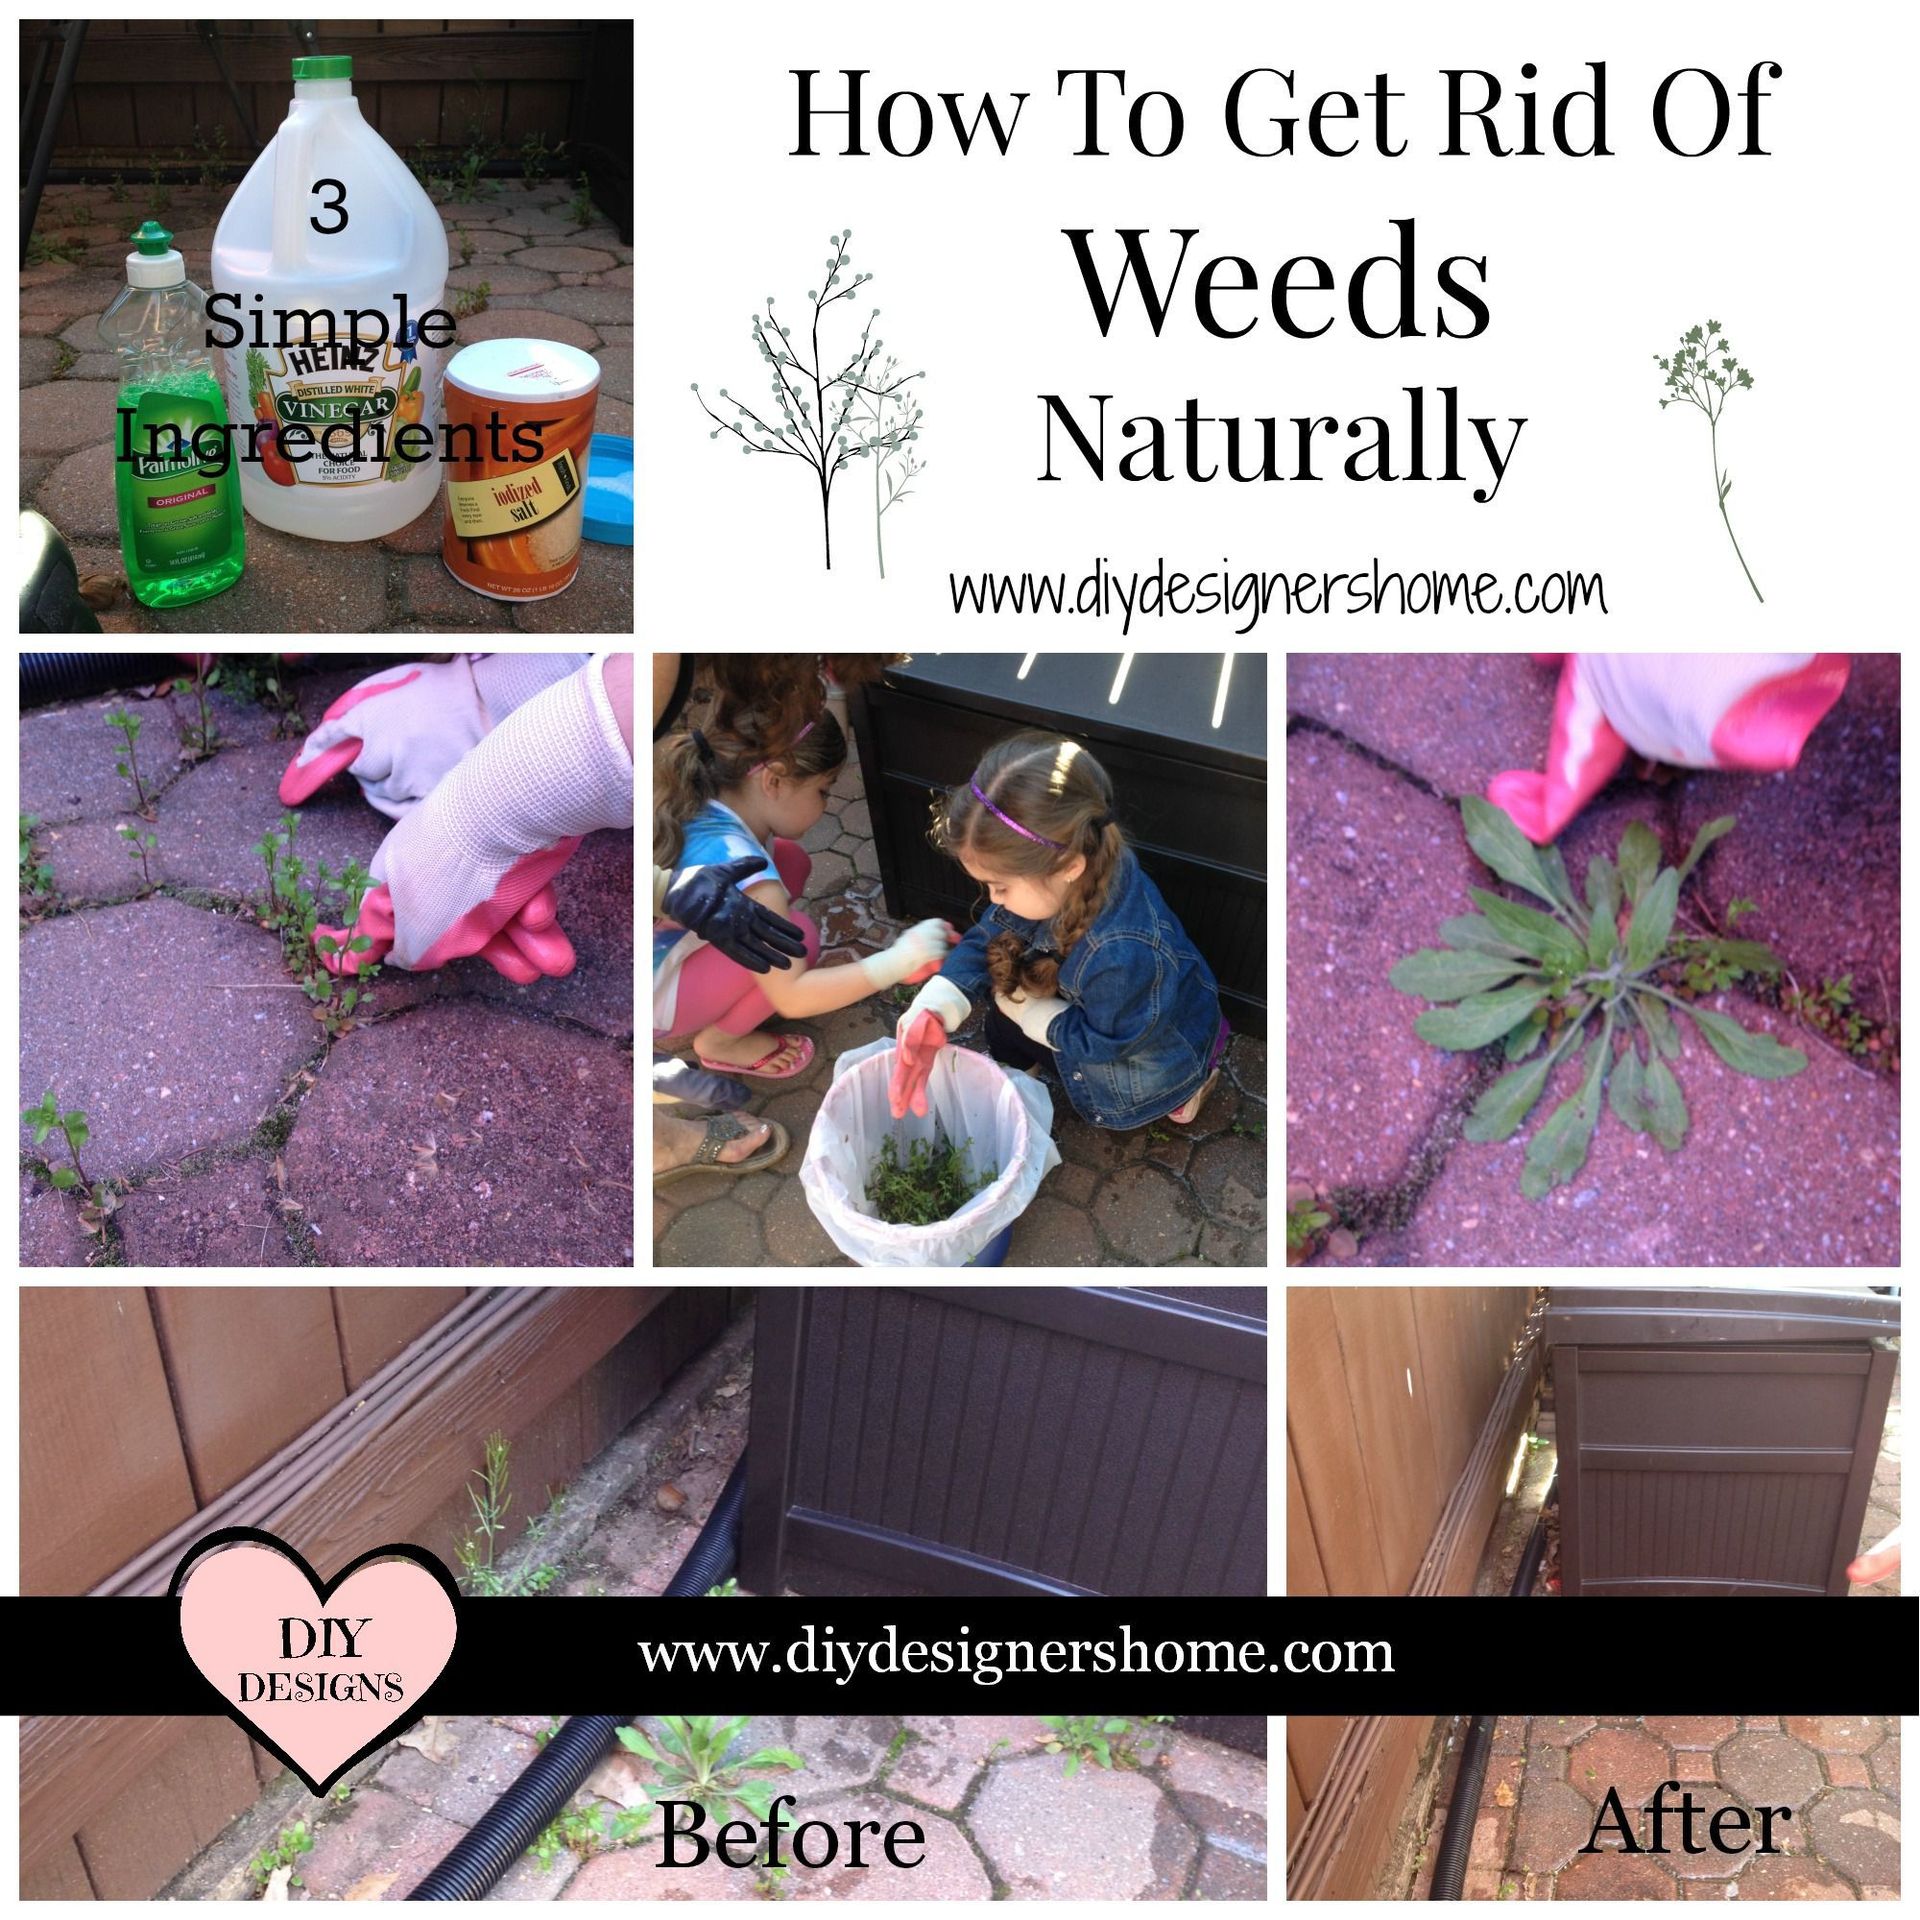 How To Get Rid Of Weeds Naturally